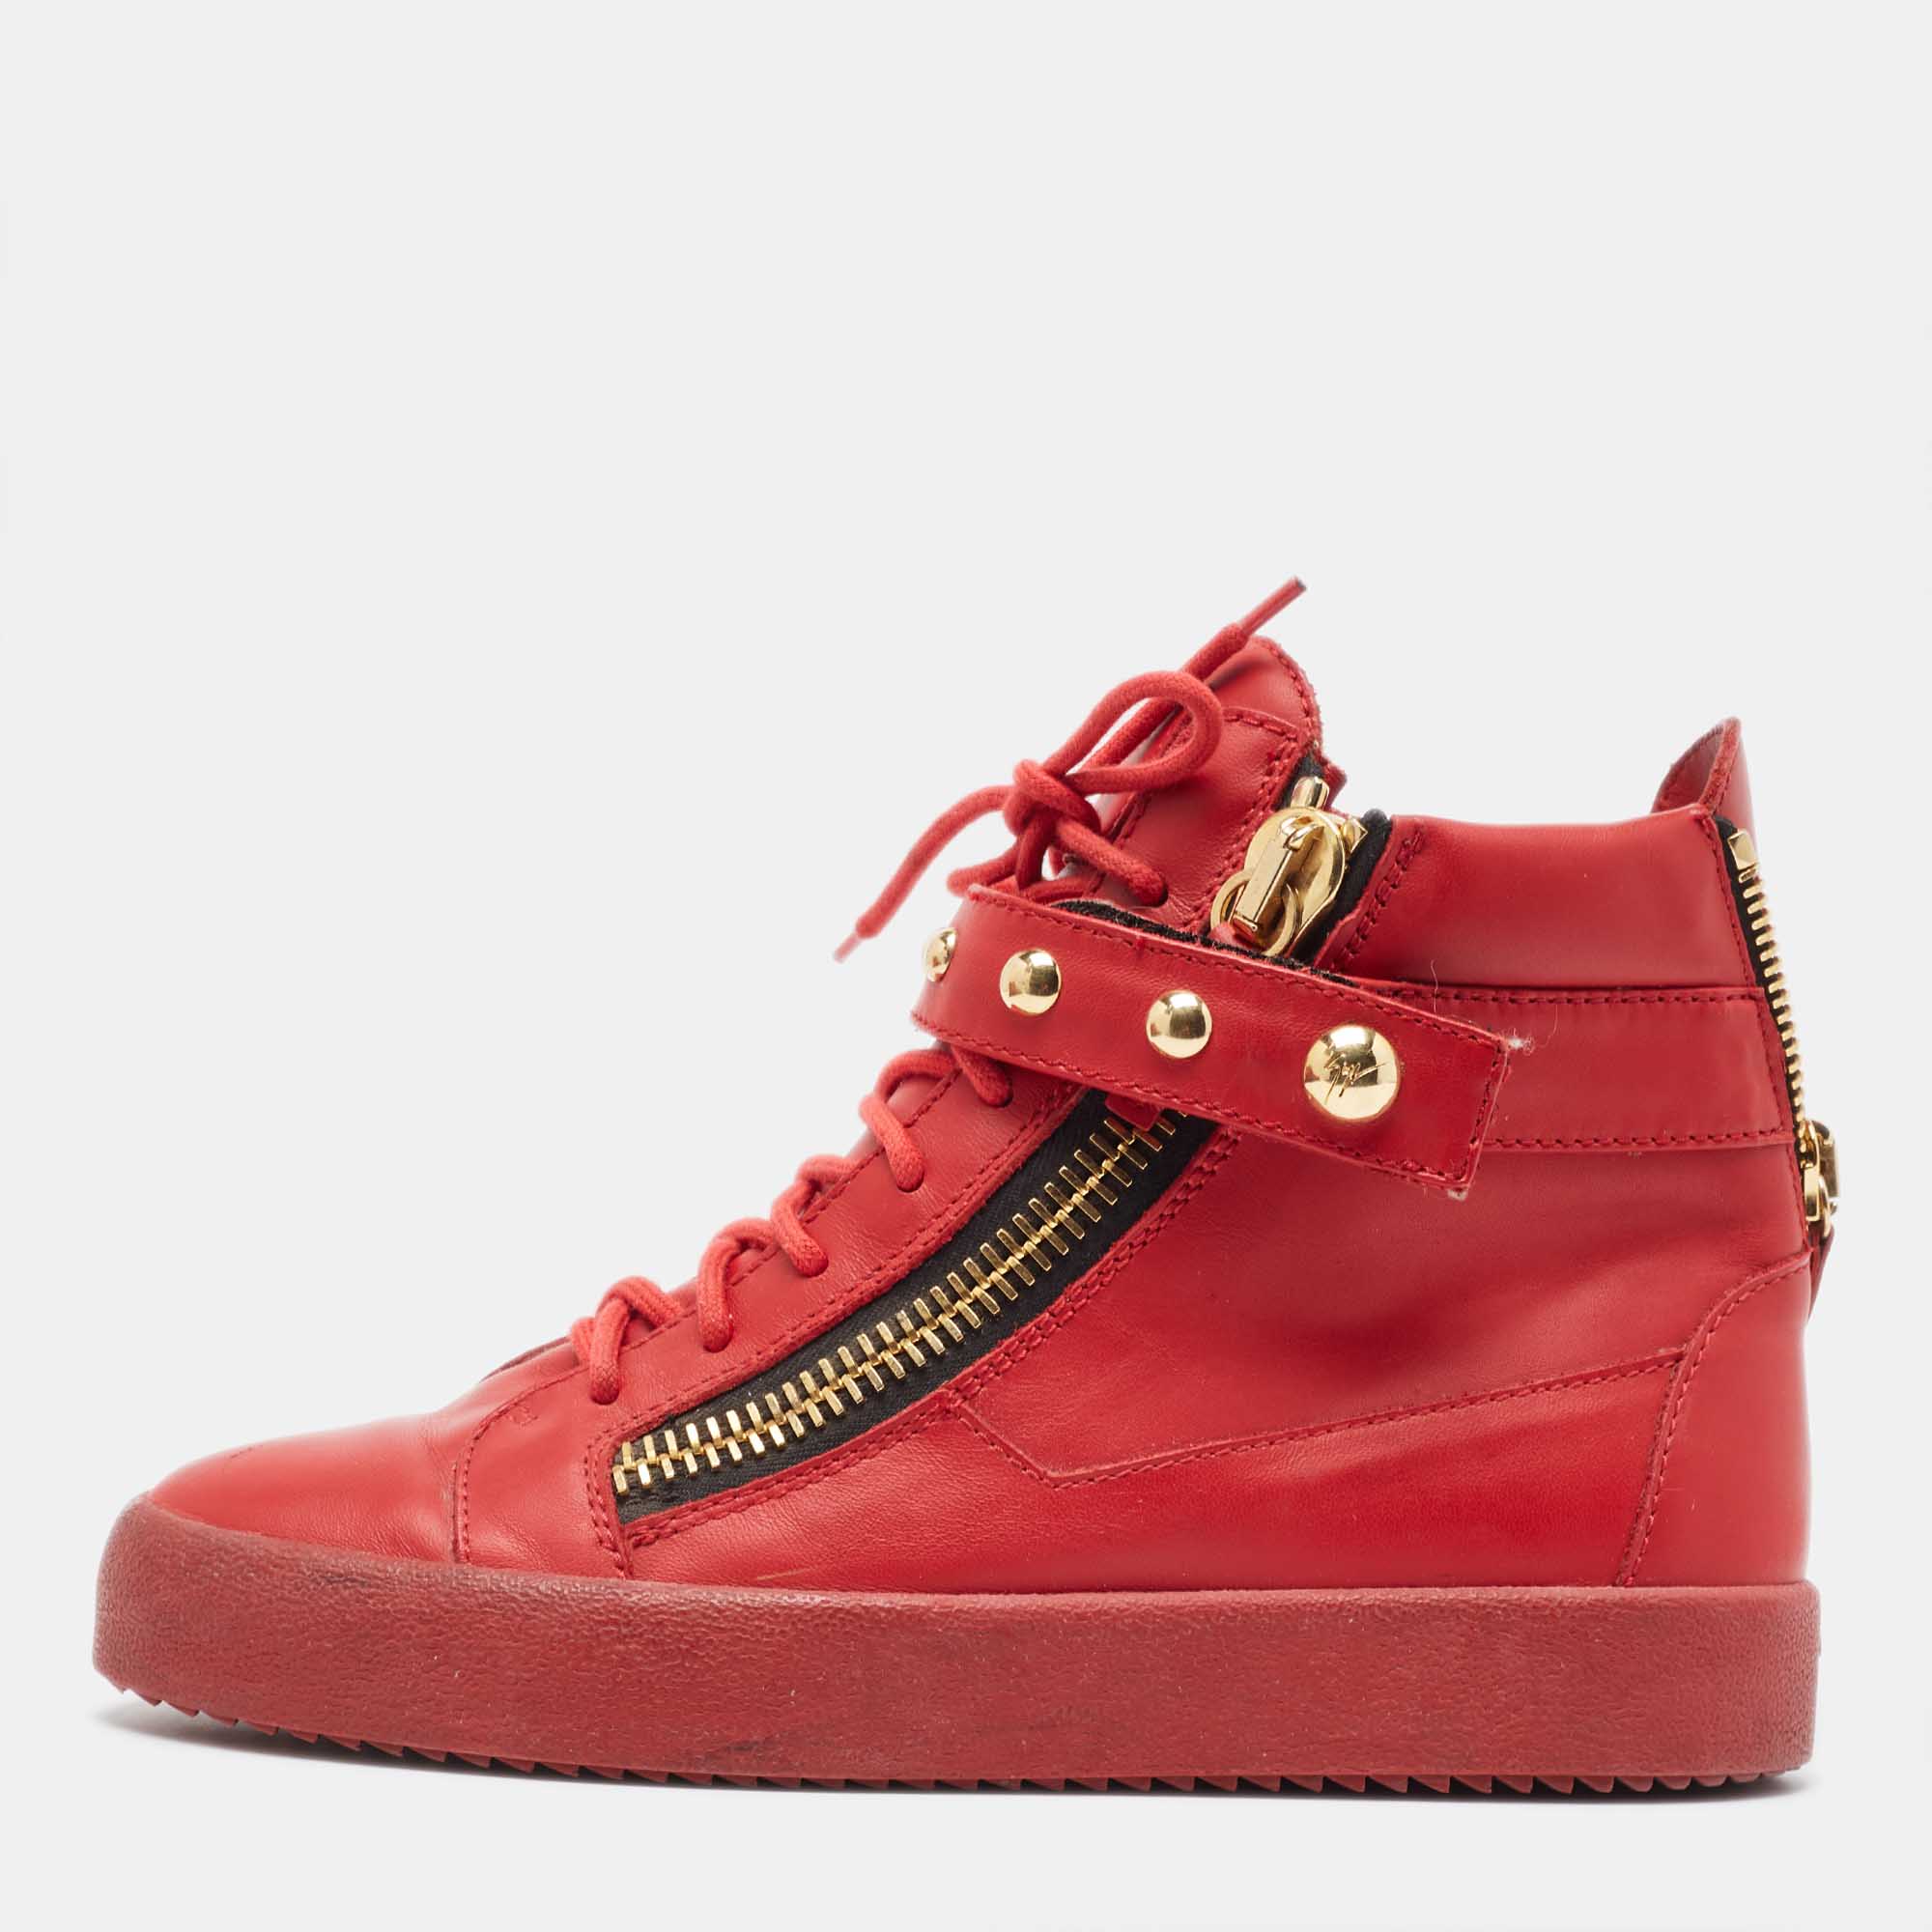 Pre-owned Giuseppe Zanotti Red Leather Studded Double Zip High Top Sneakers Size 42